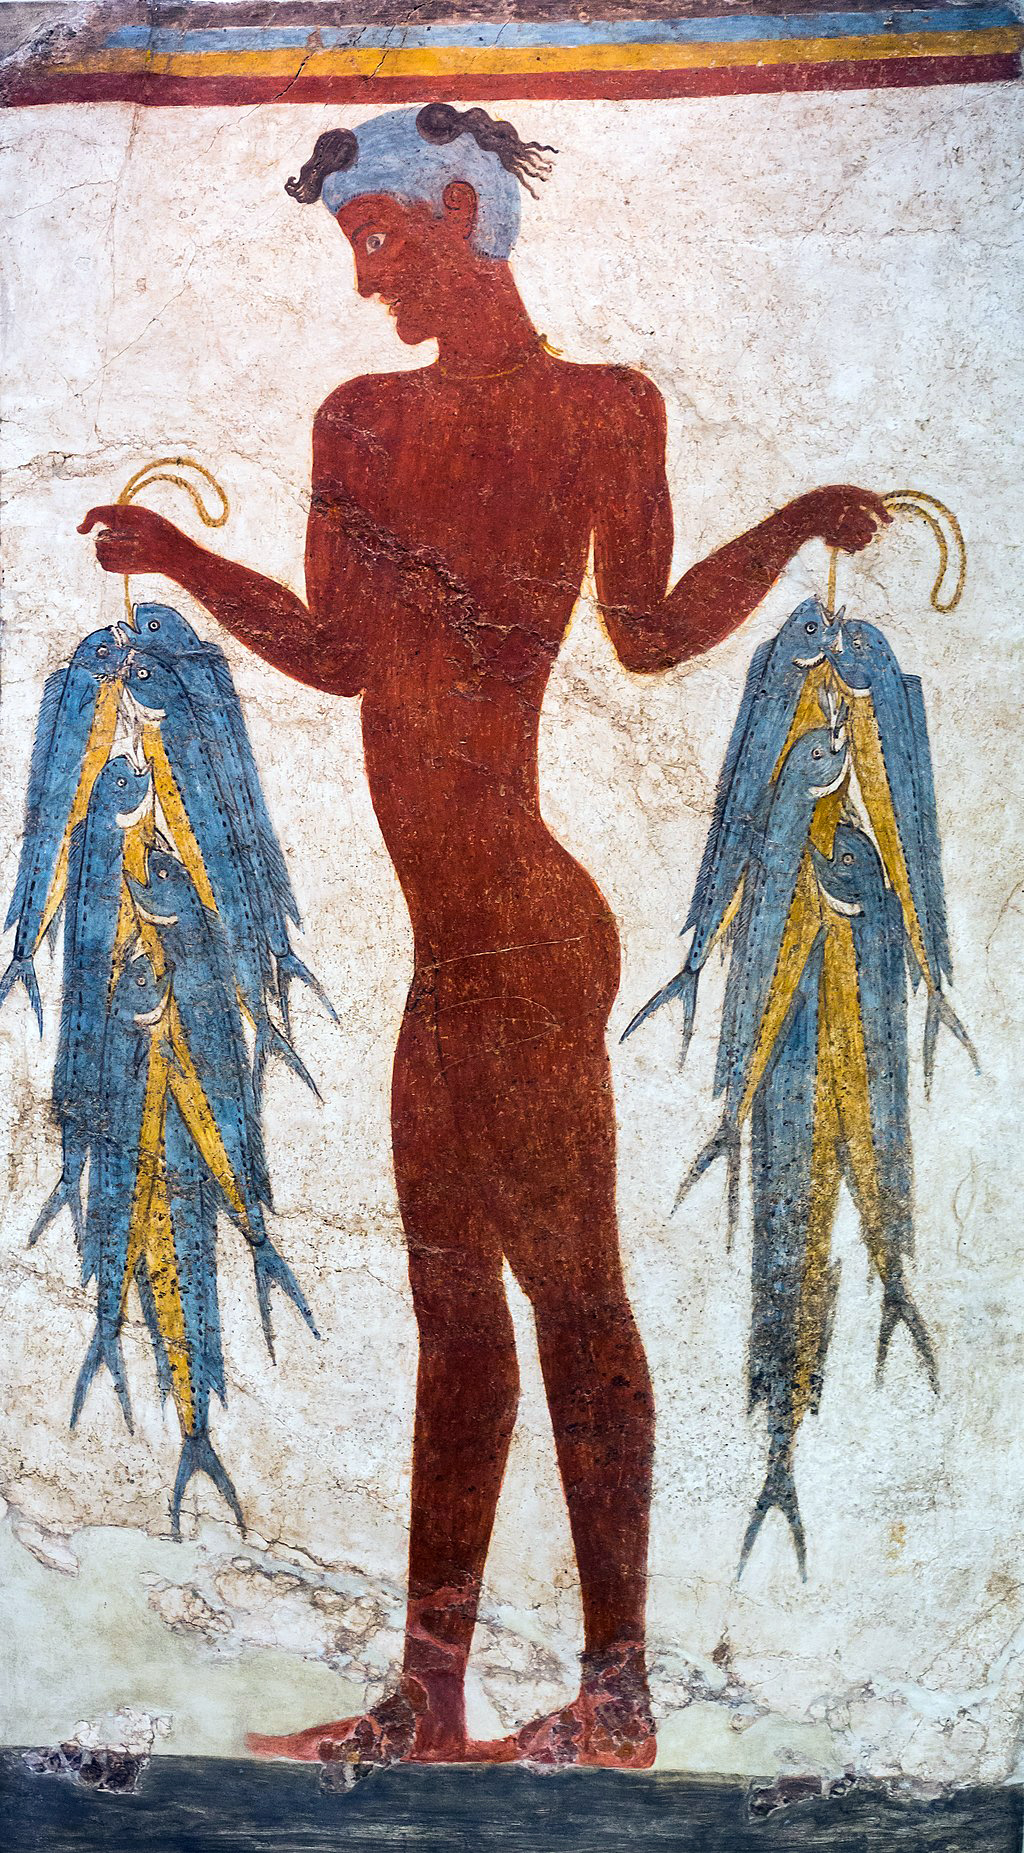 Fisherman fresco, c. 17th century B.C.E., Room 5 fo the West House, Akrotiri, Thera (National Archaeological Museum, Athens)